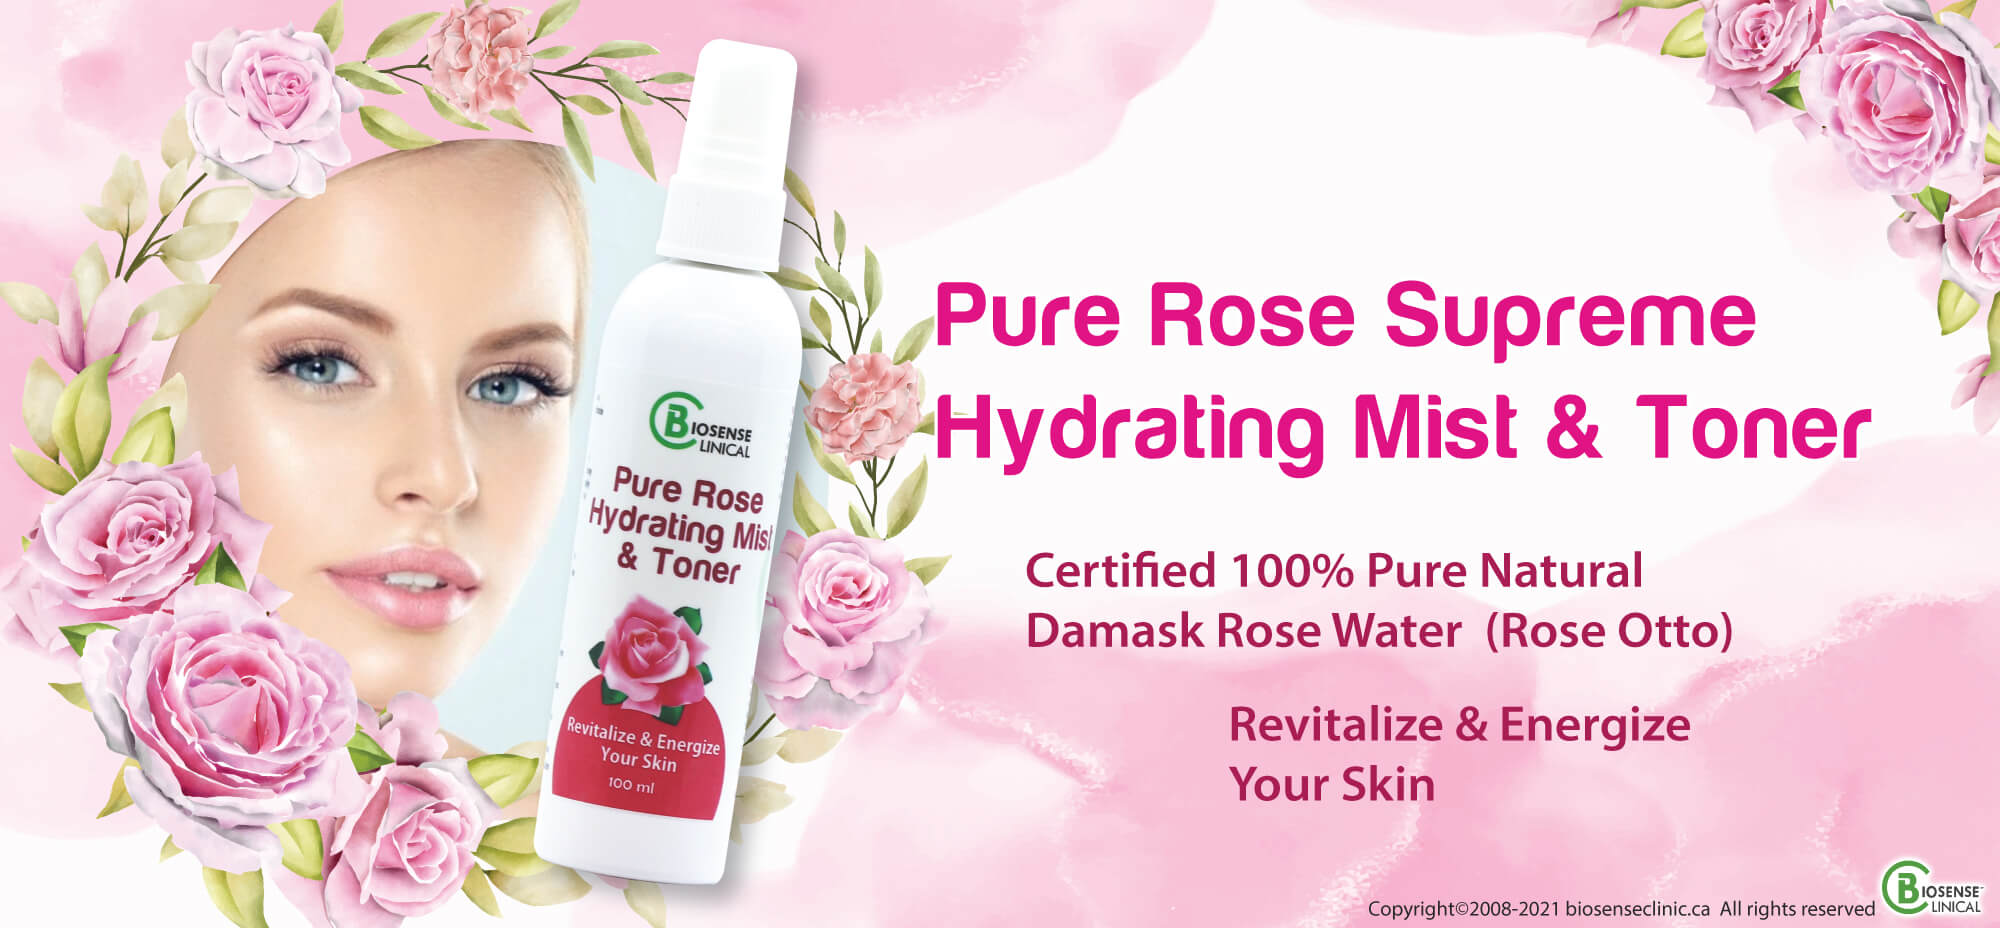 BiosenseClinical Professional Custom Compound Pure Rose Supreme Hydrating Mist & Toner product banner